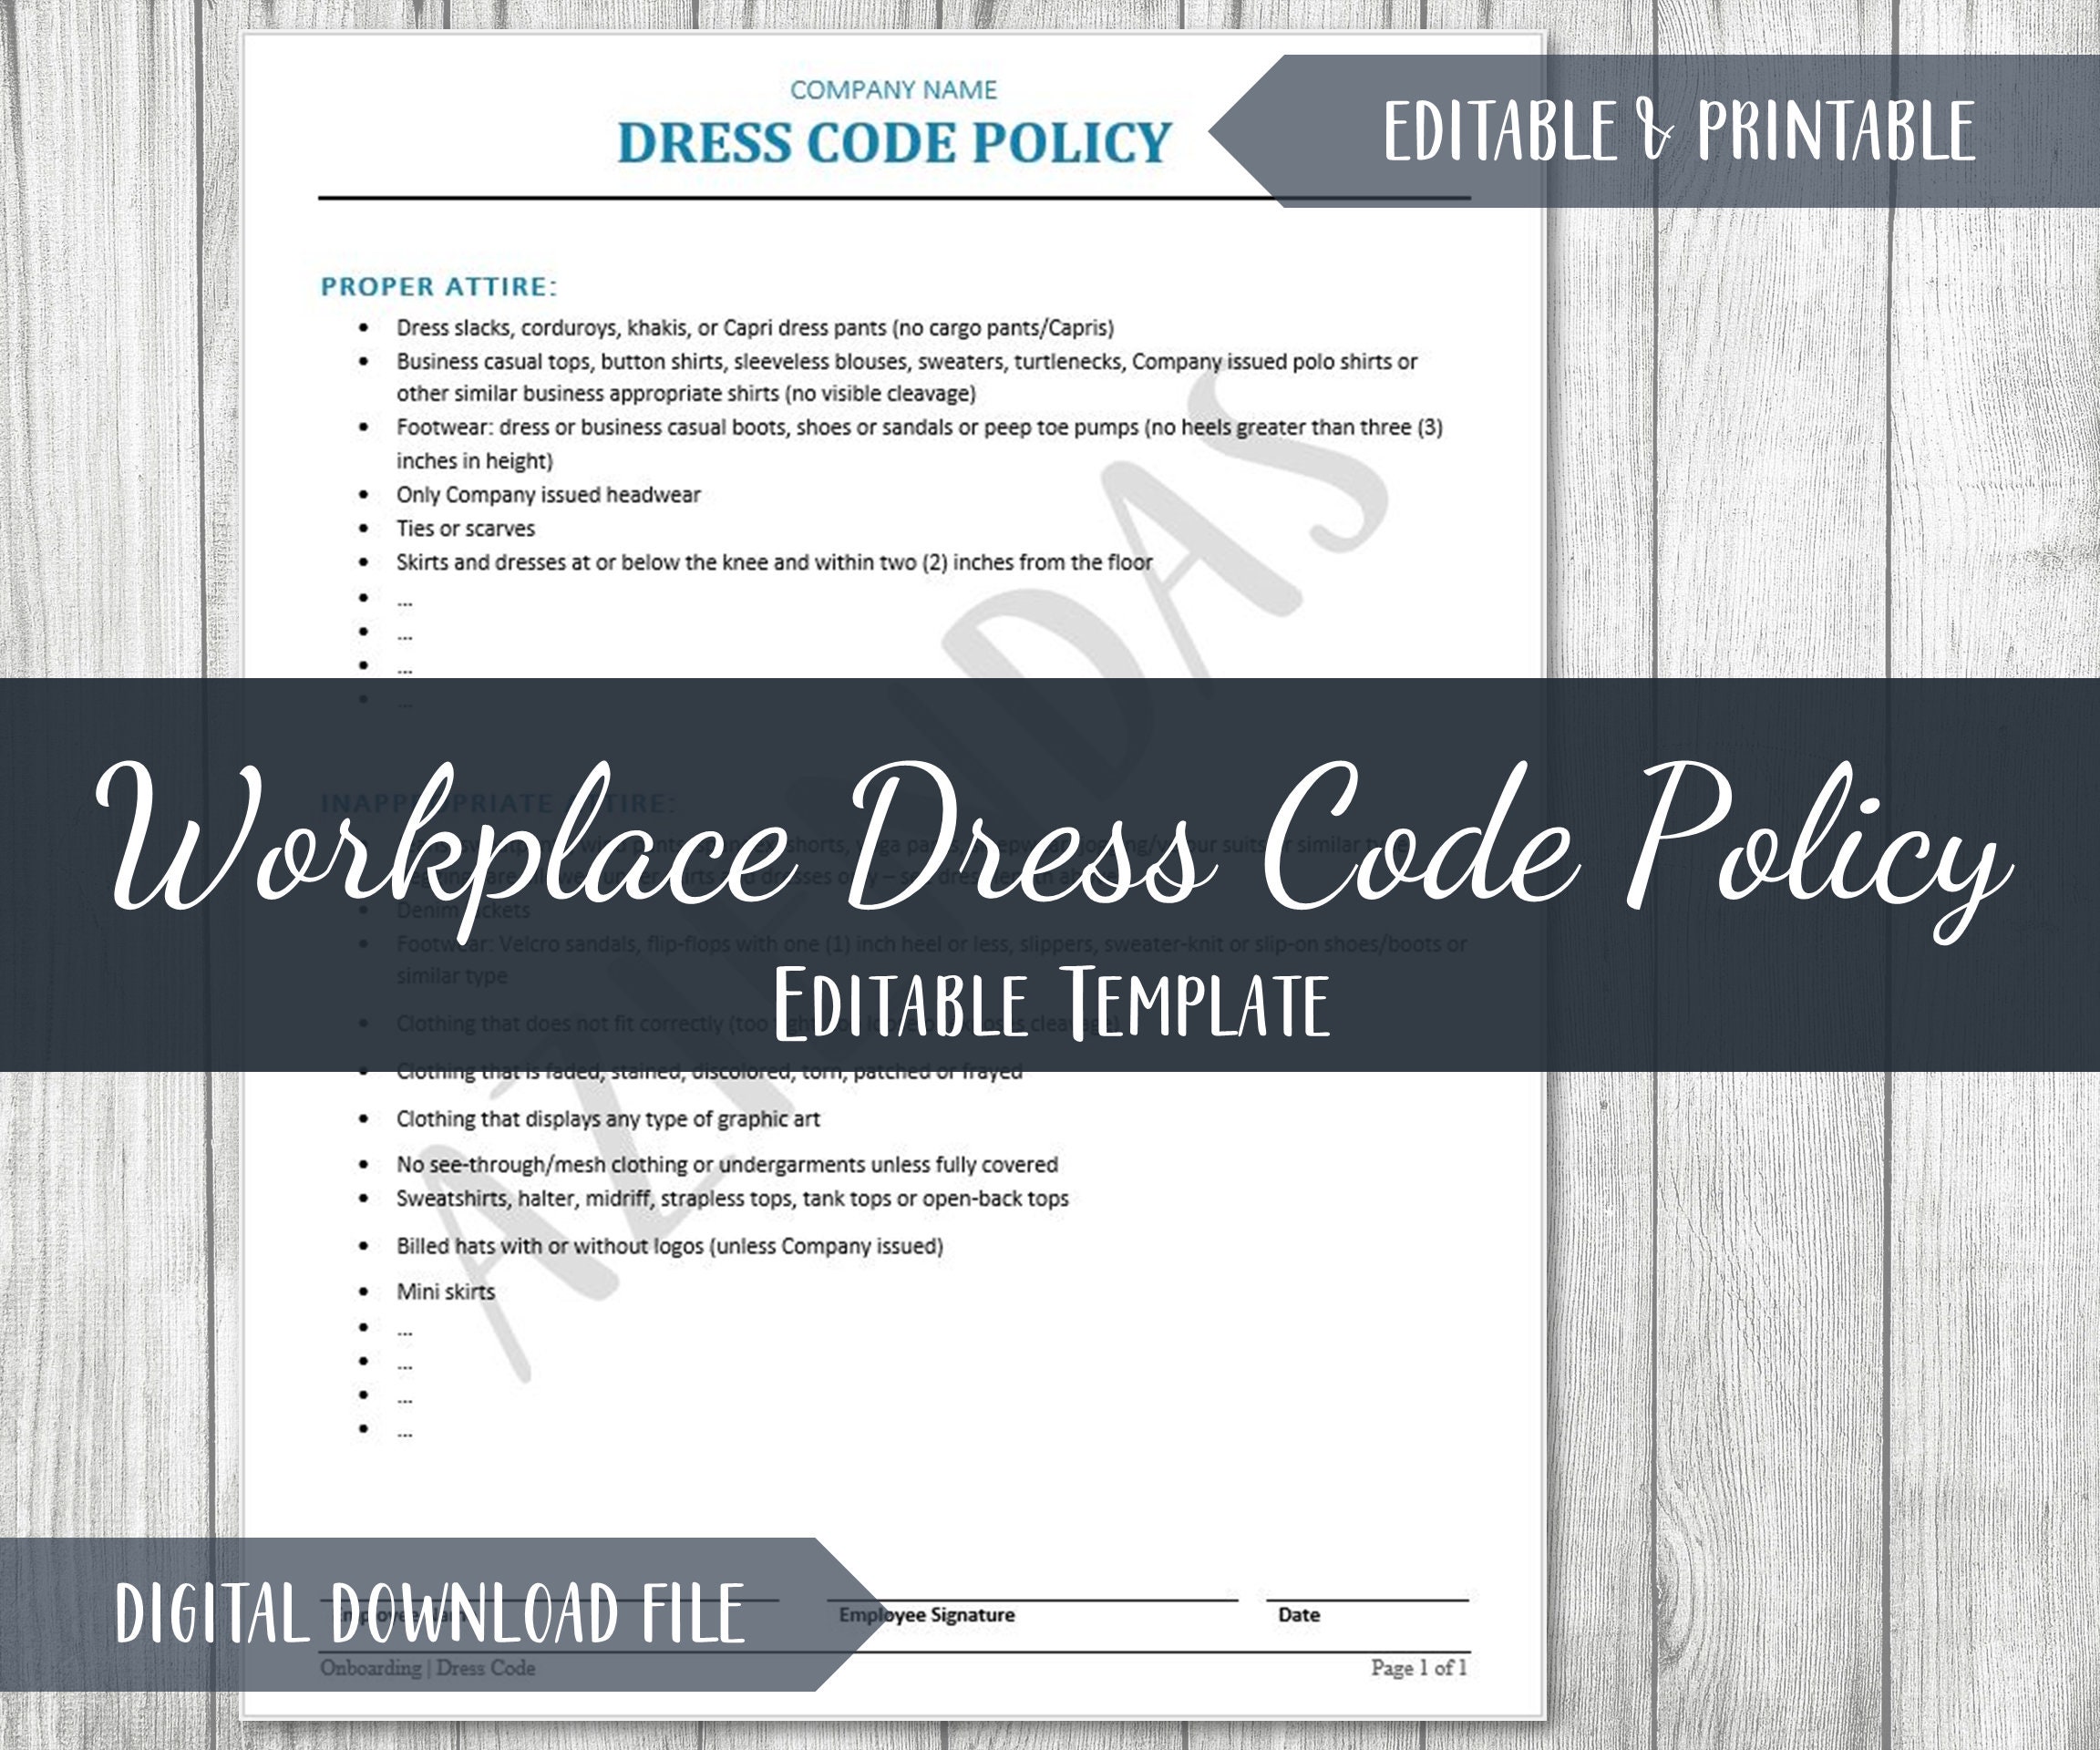 Resources / Dress Code Policy